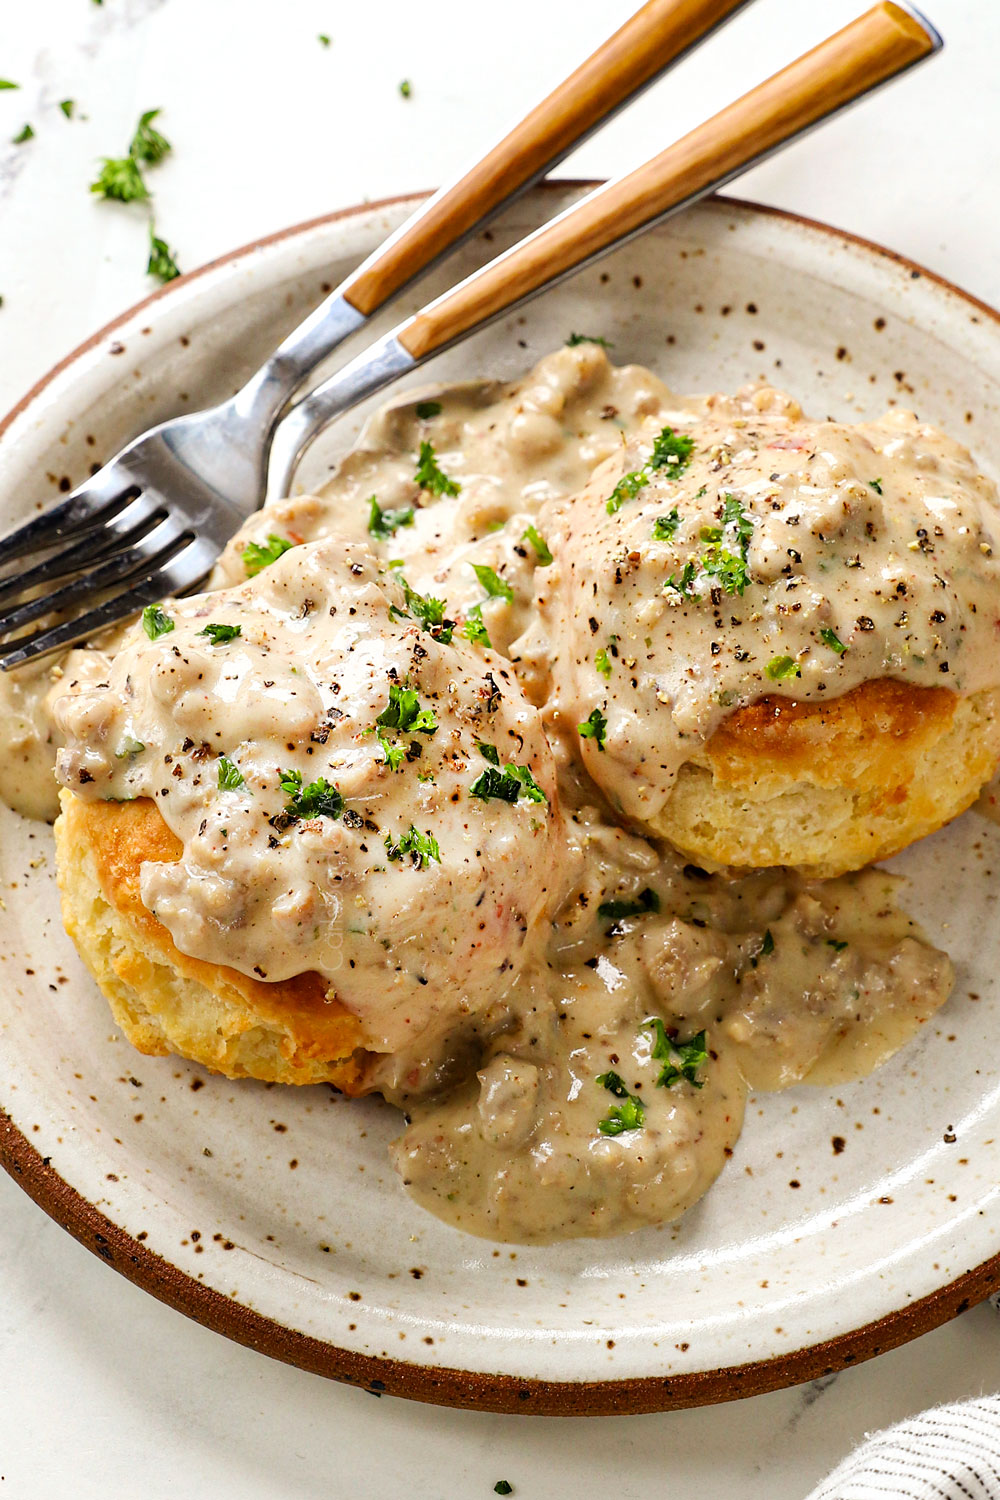 a plate of sausage gravy and biscuits showing how creamy the gravy is